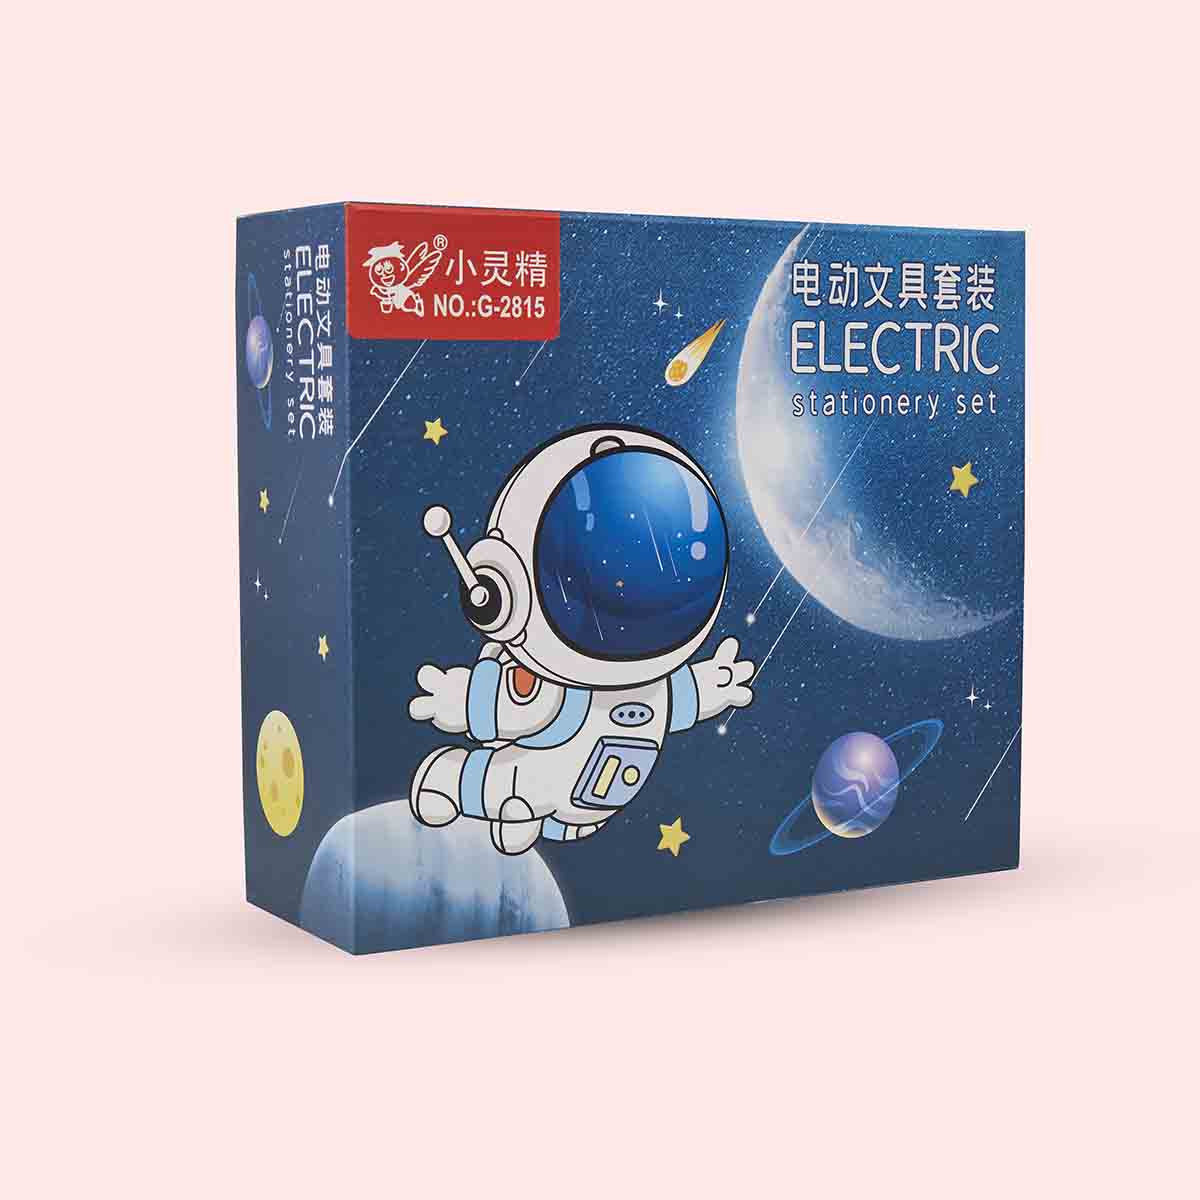 ElectraWrite: Electric Stationery Gift Set - Space